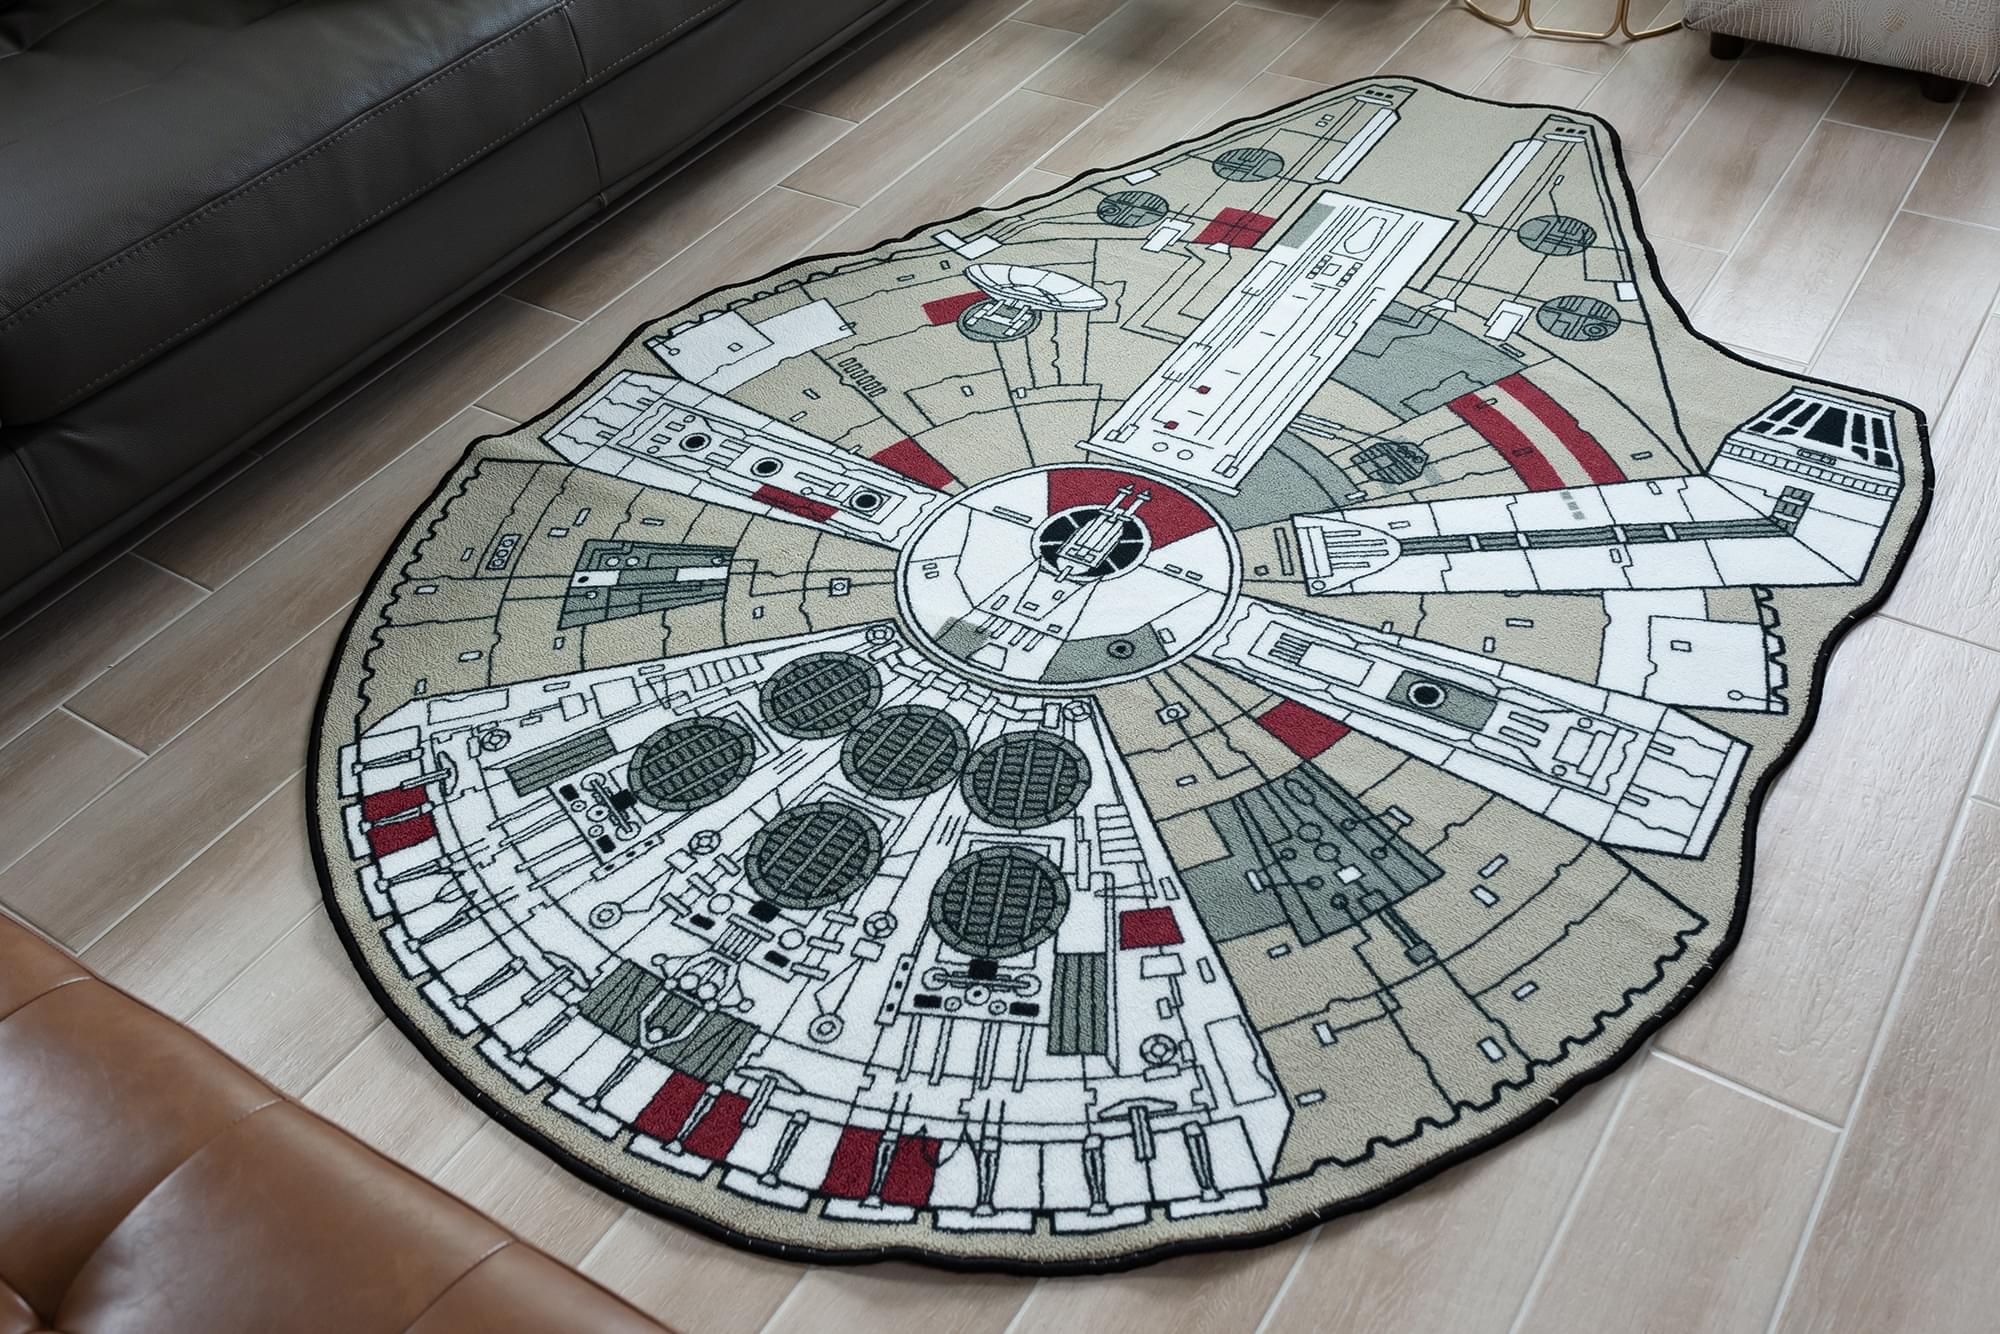 Star Wars Large Millennium Falcon Entry or Area Rug, 59" L x 79" W - image 6 of 7